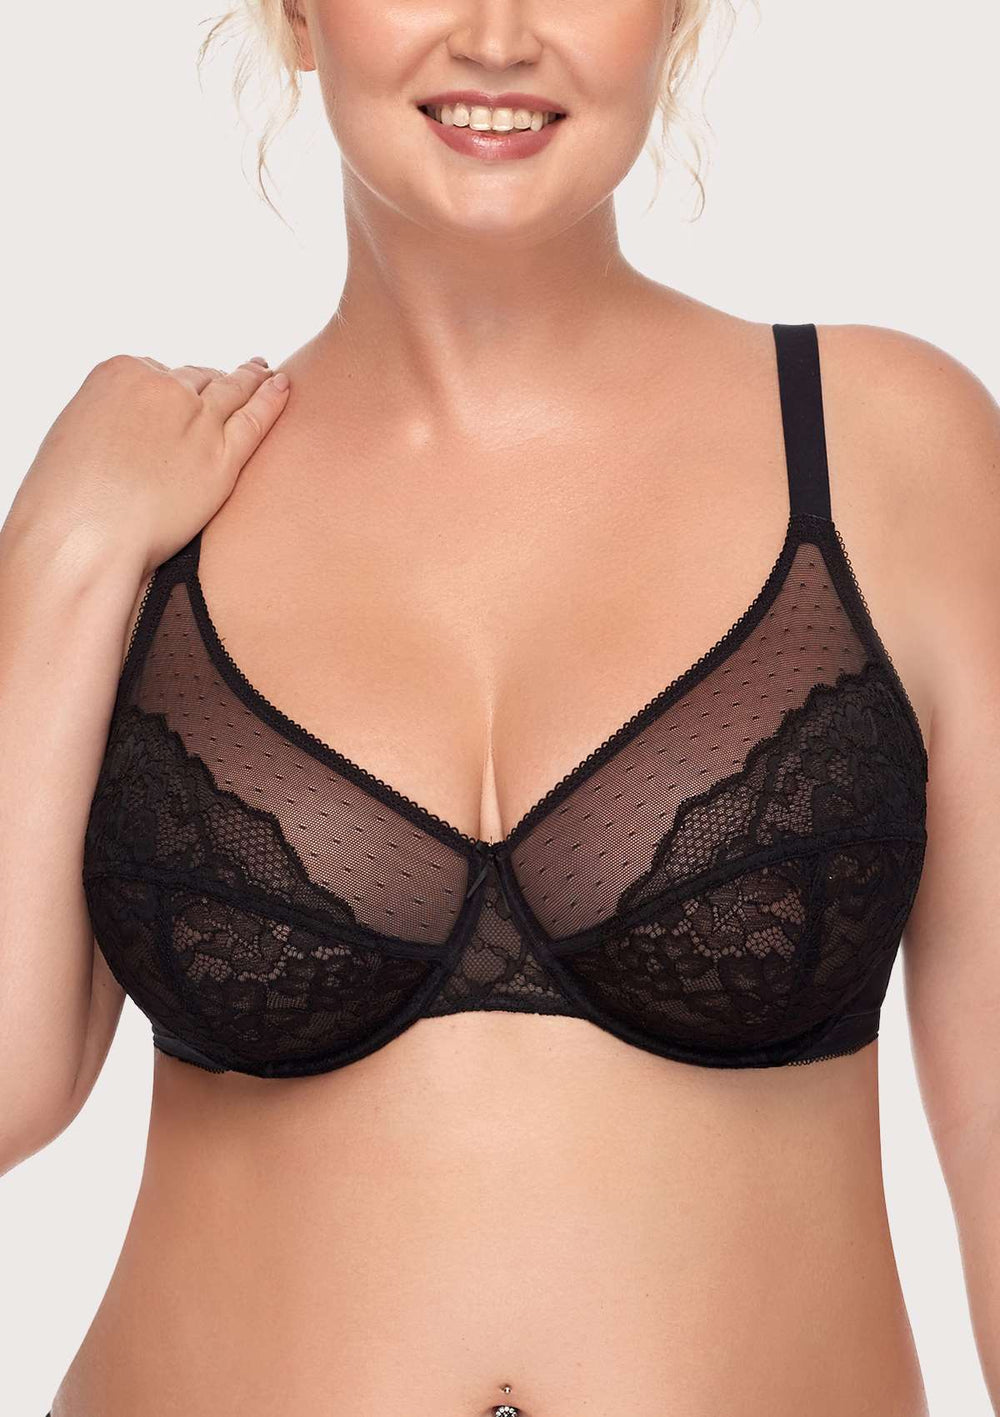 HSIA Enchante Lace Wire Bra for Lifting and Separating Large Breasts